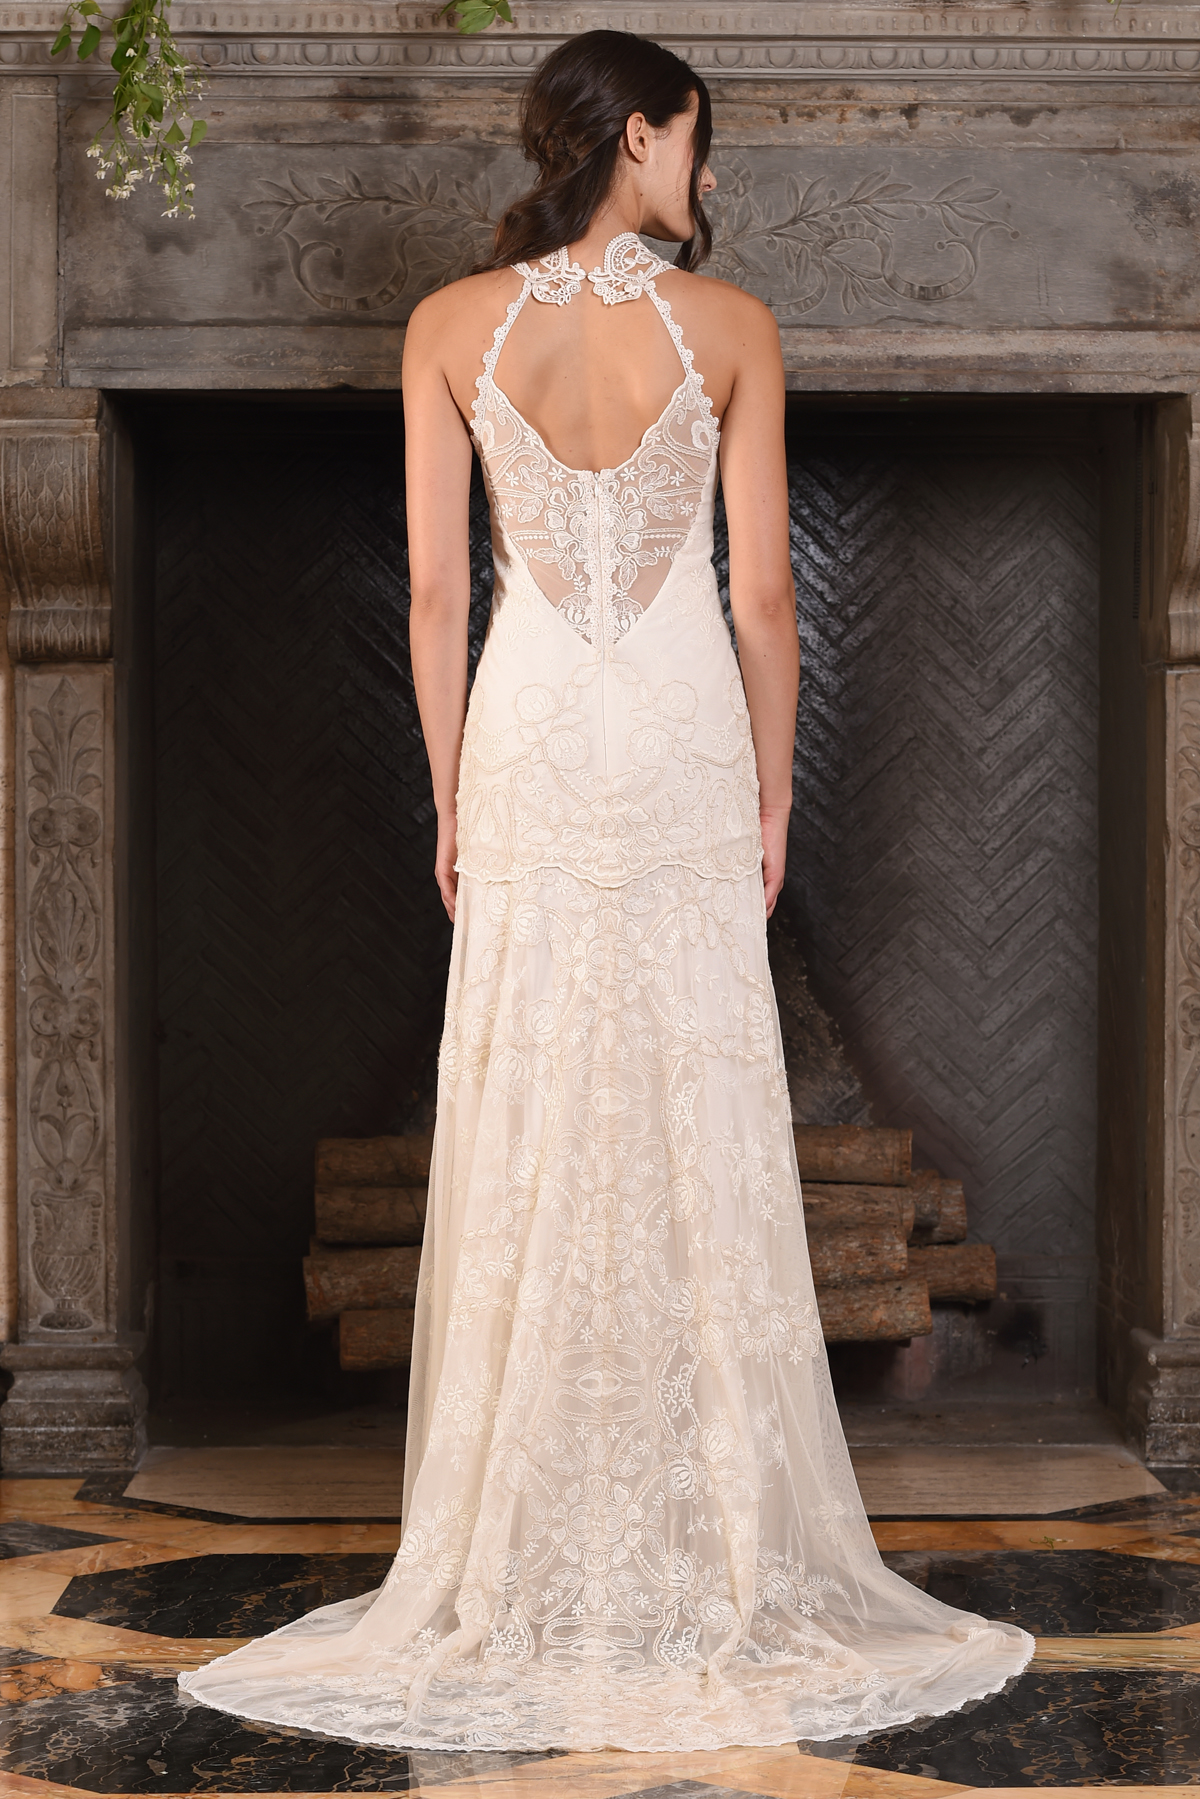 The Athena gown, from Claire Pettibone's 'The Four Seasons' bridal couture collection for 2017.